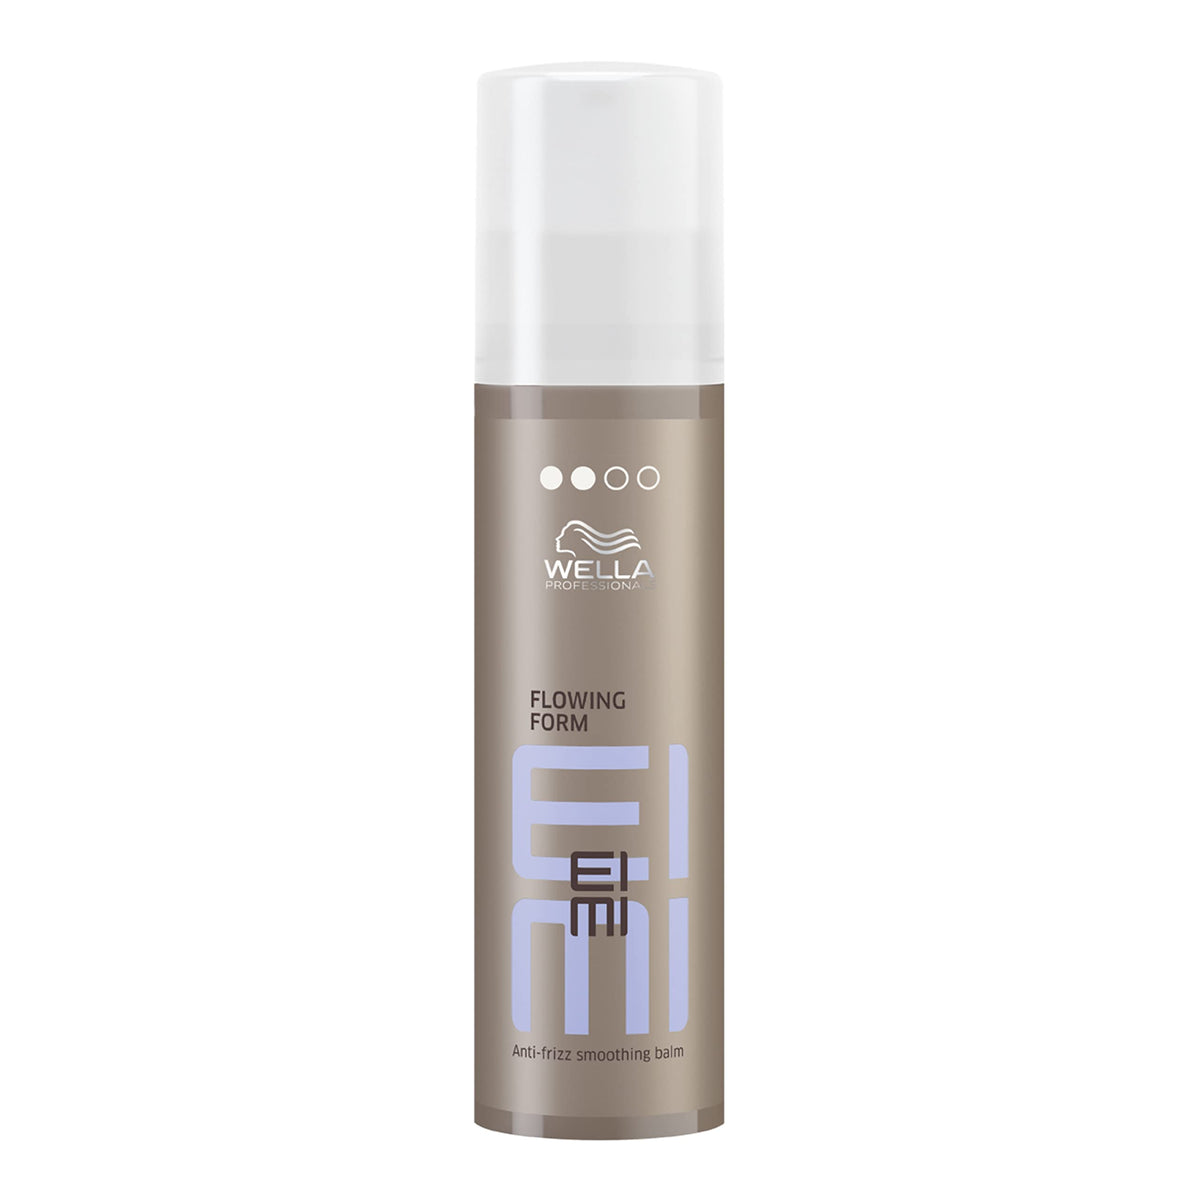 Wella EIMI Flowing Form Anti-Frizz Smoothing Balm, For Frizzy And Damaged Hair, Provides Smooth And Natural Sleek Finish, 3.38 Fluid oz